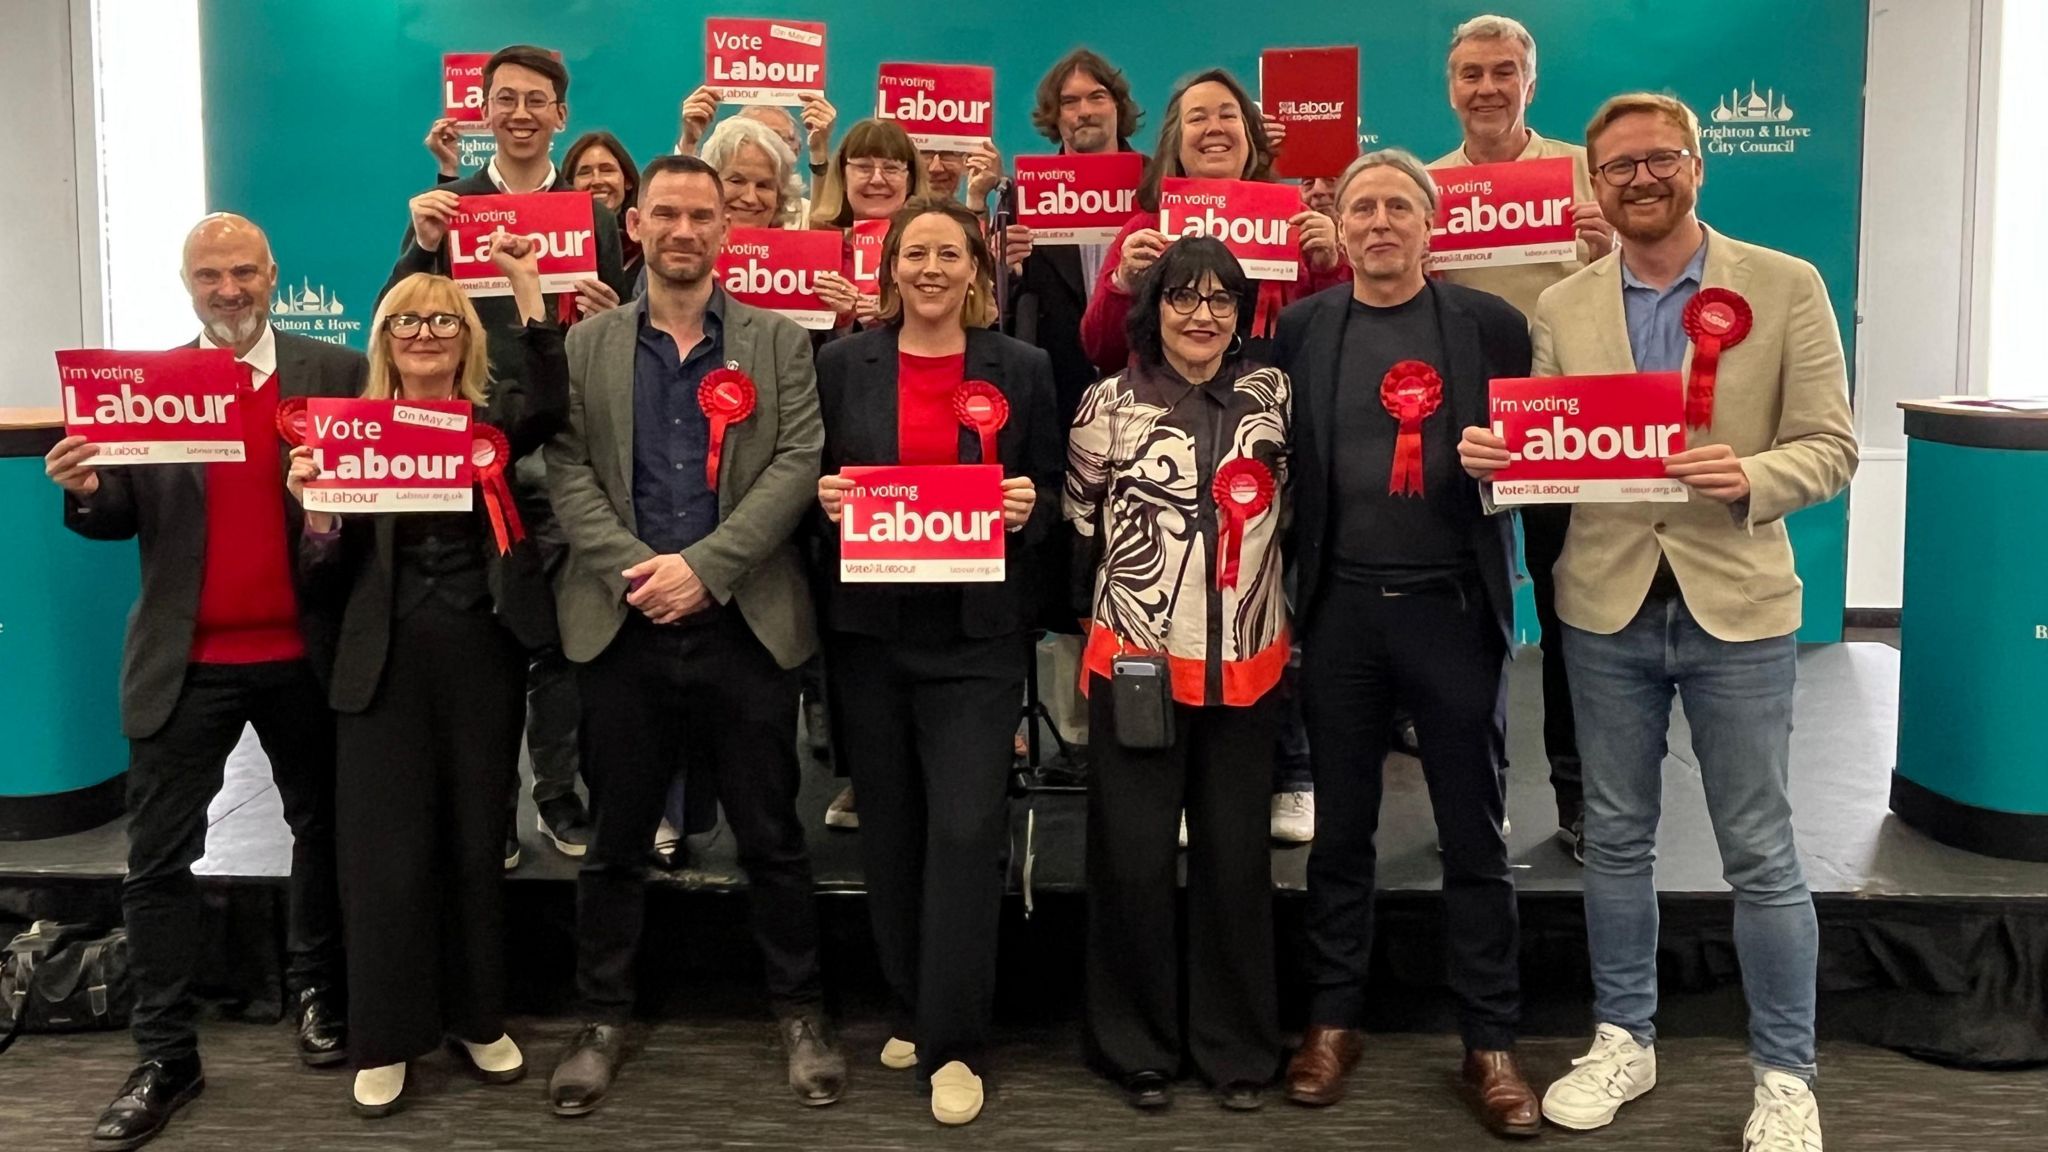 Labour Party members with the two new councillors, Milla Gauge and Theresa Mackay, in the front of the middle row